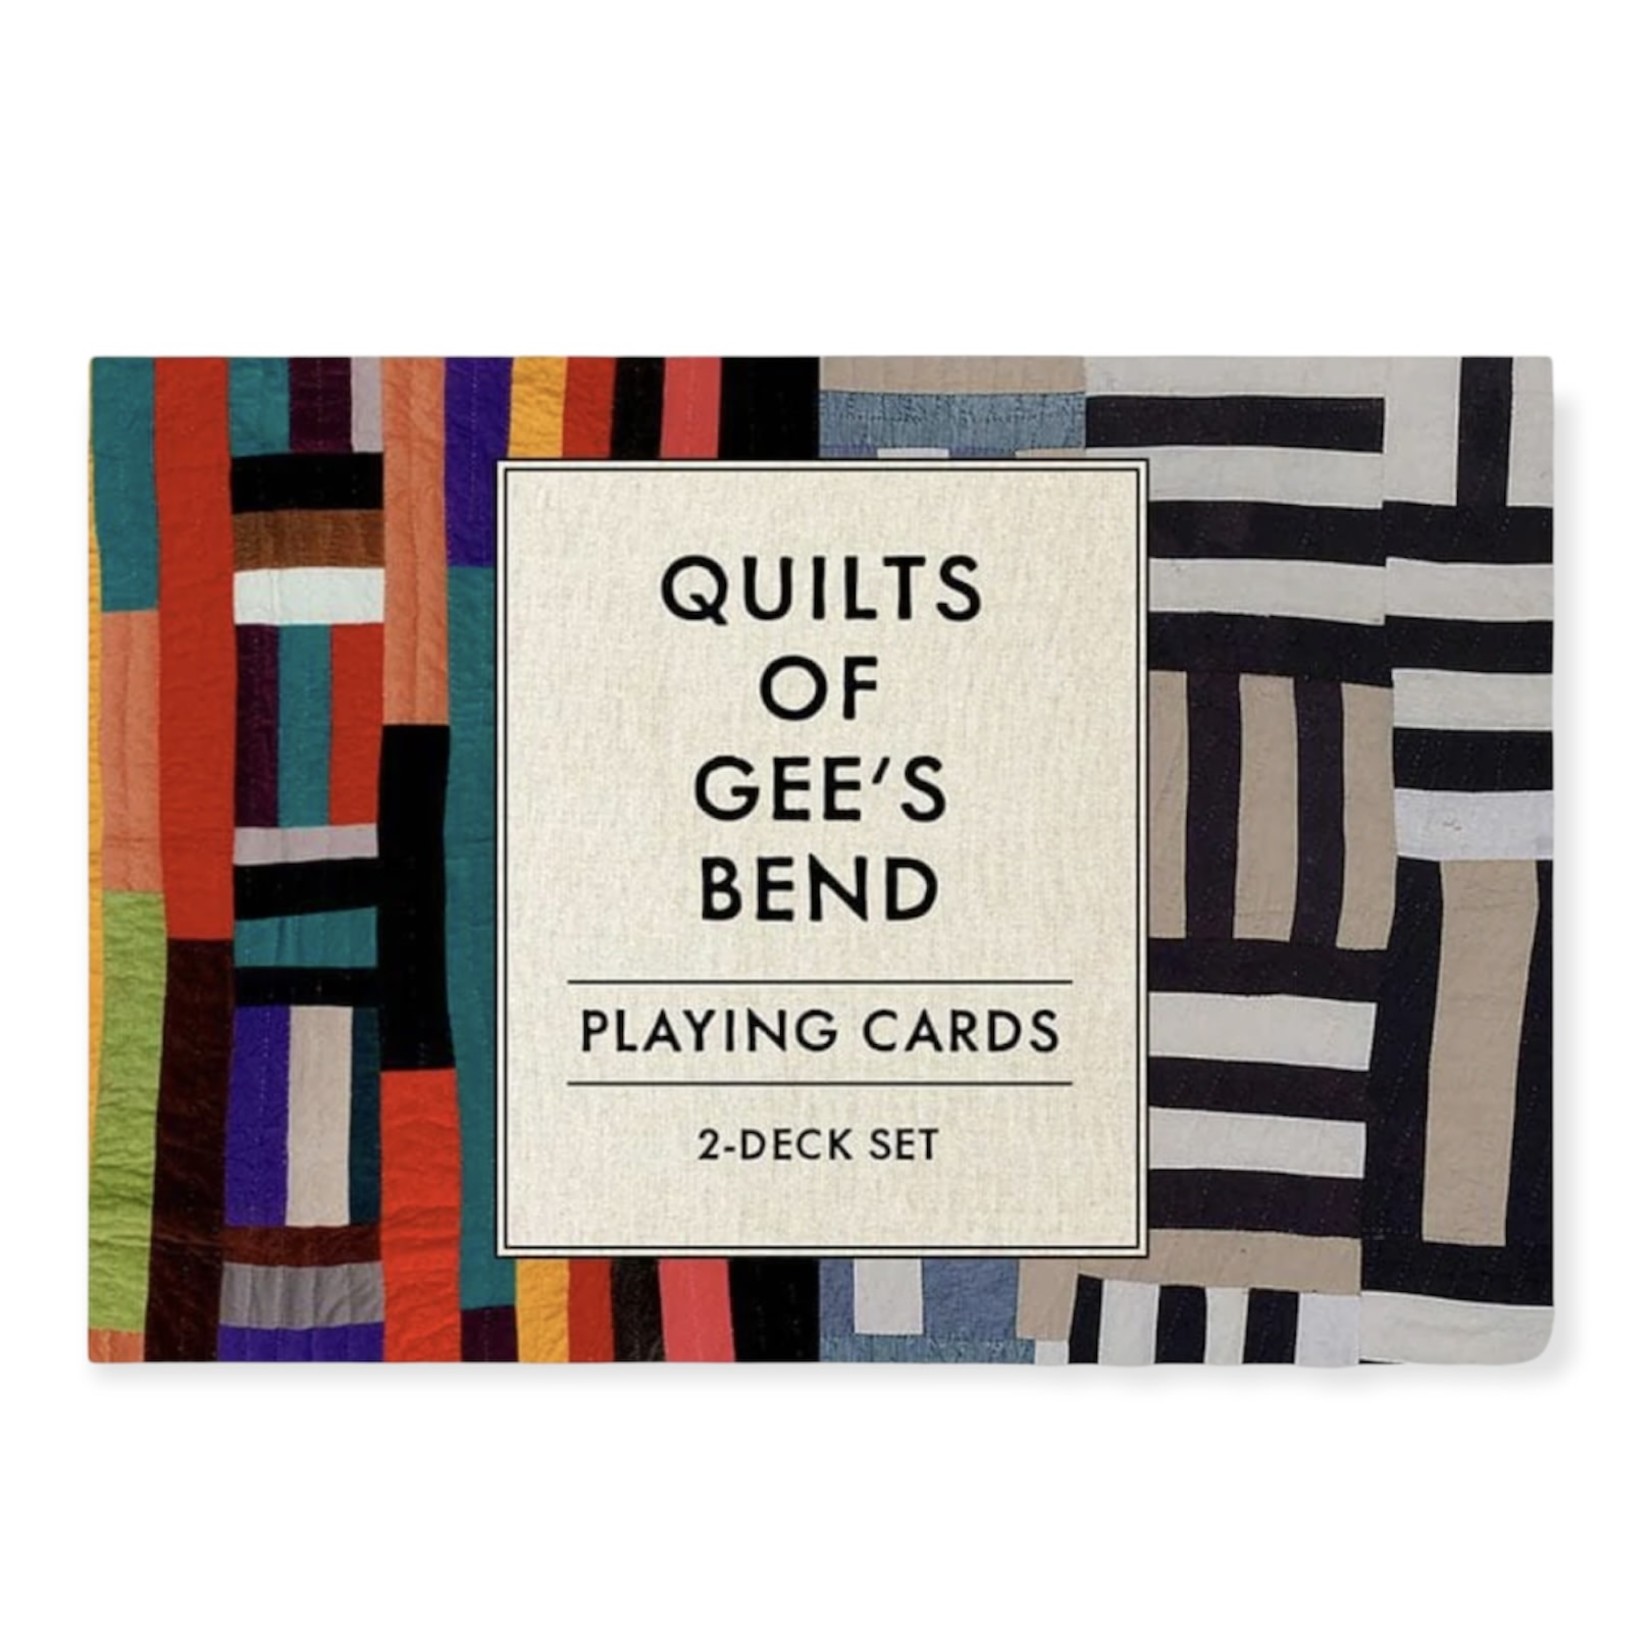 CHRONICLE BOOKS Quilts of Gee's Bends Playing Cards